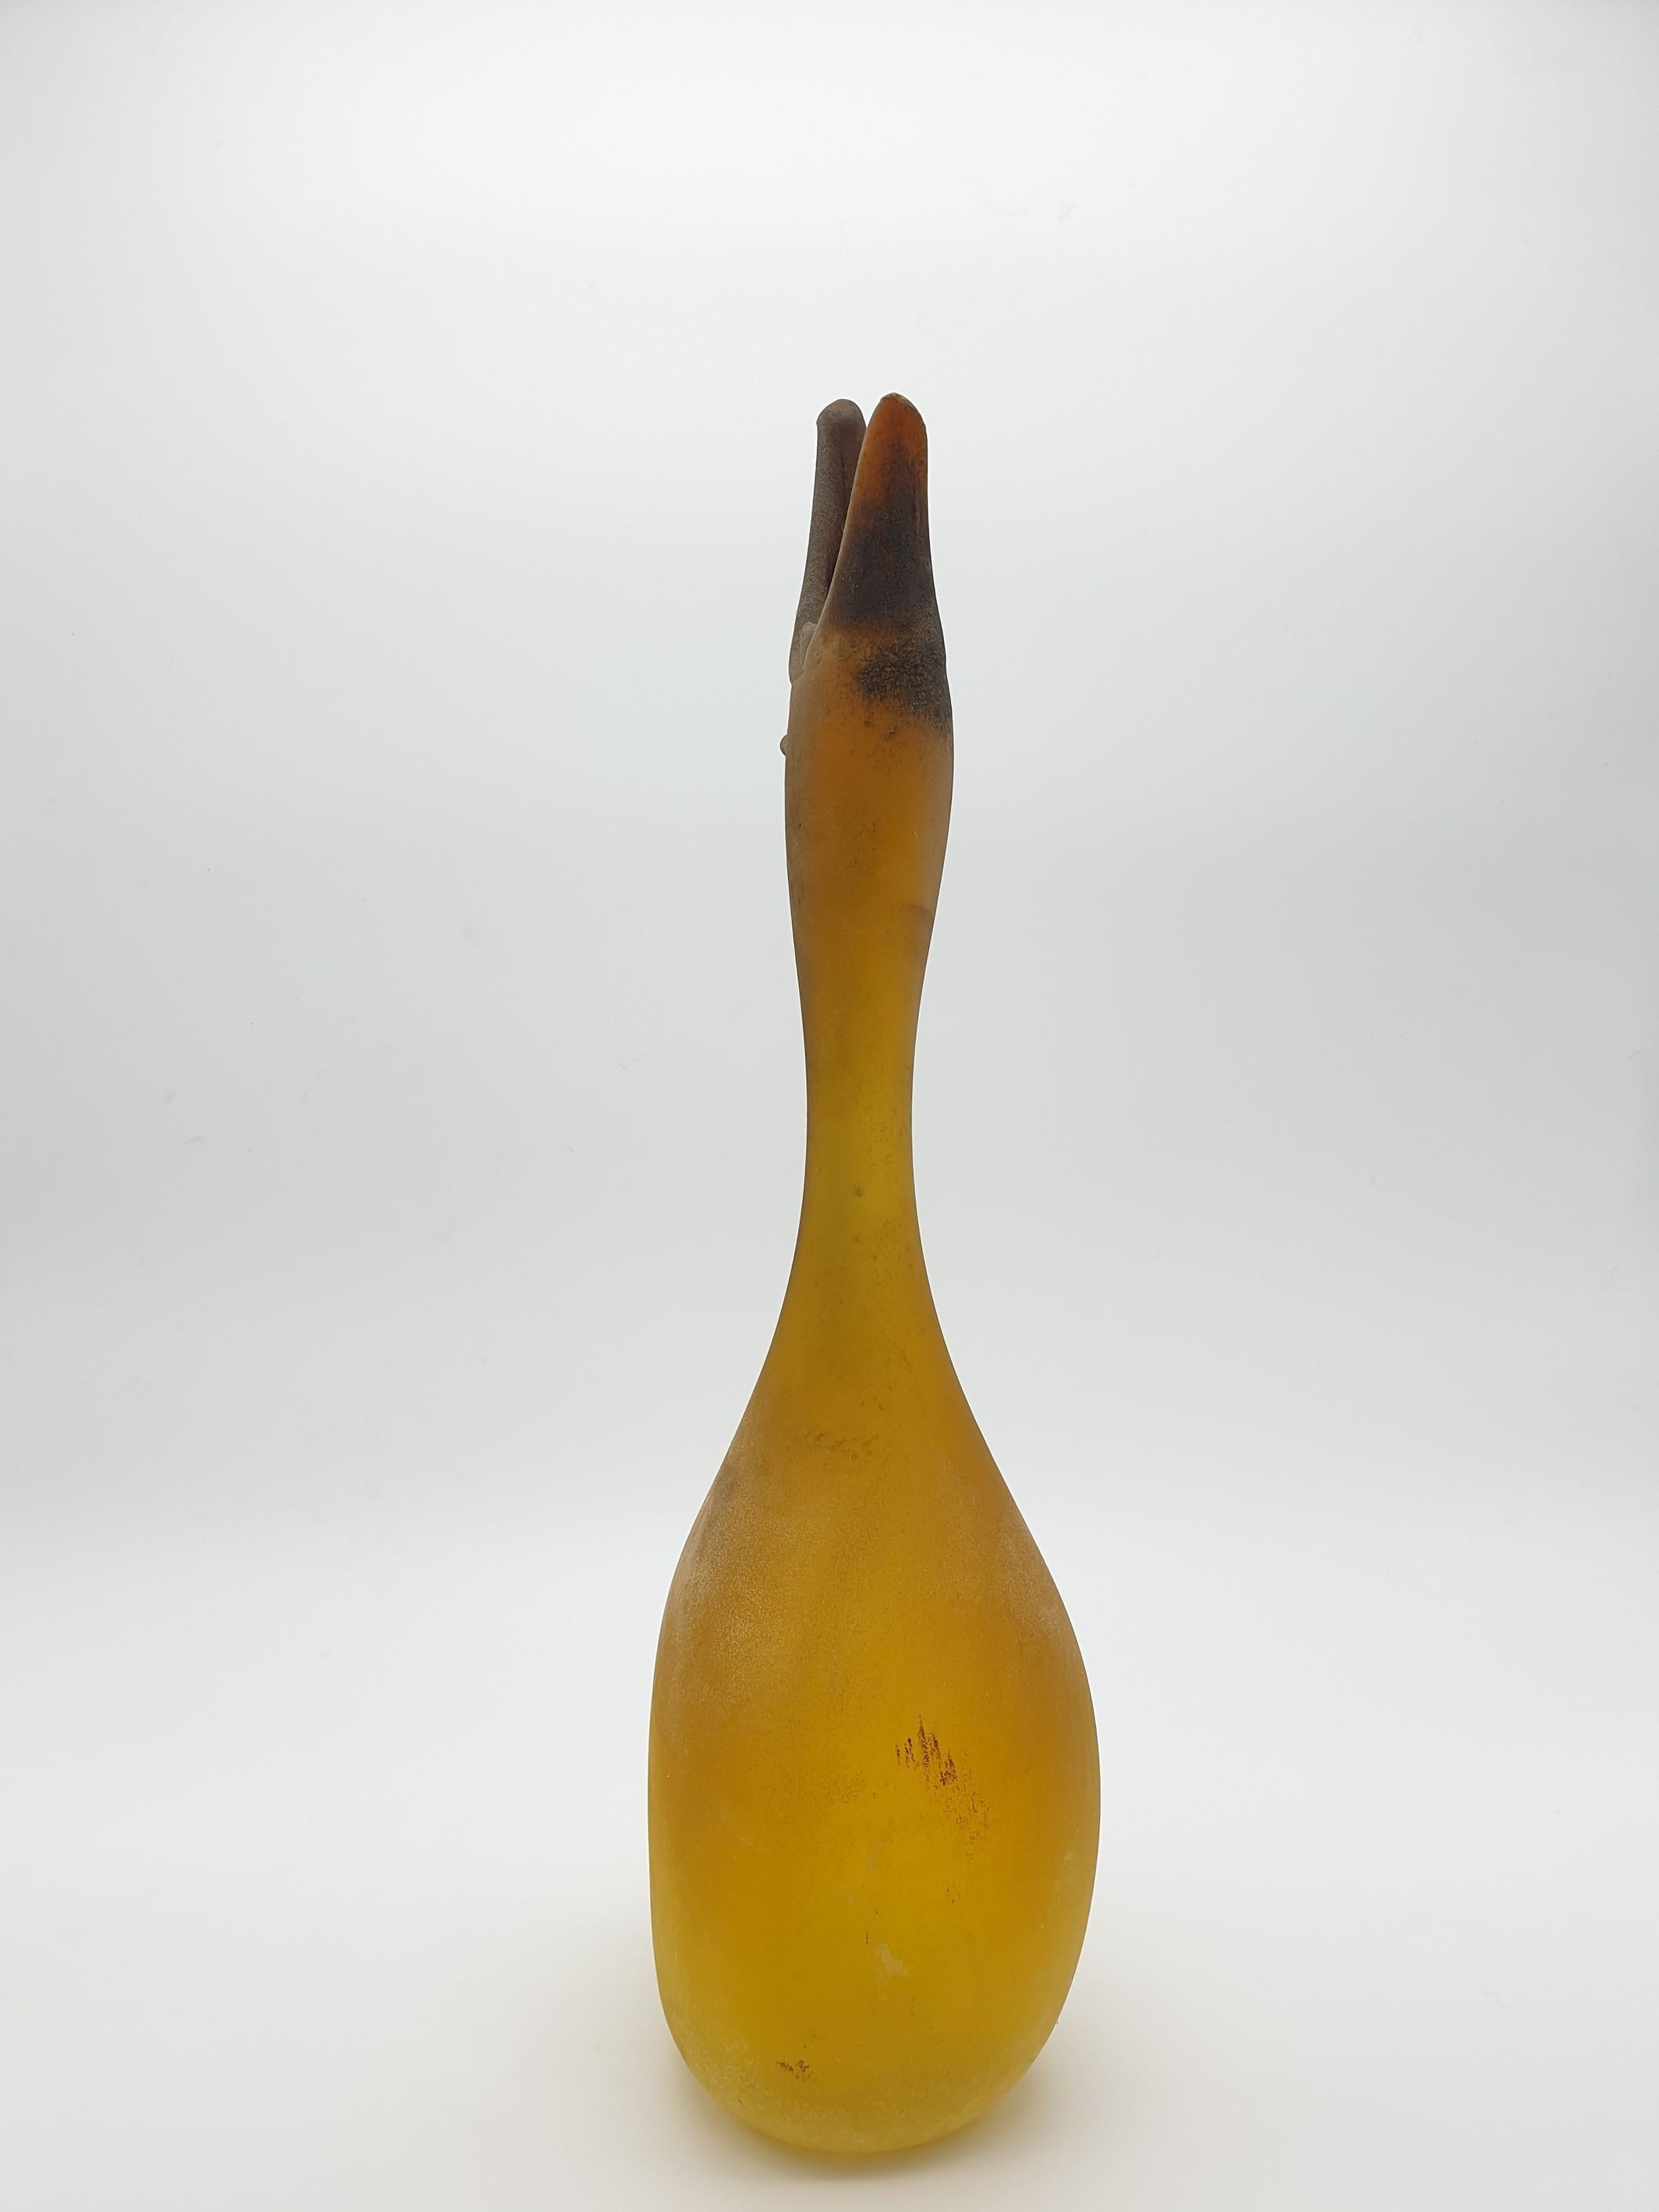 Modern Large Murano Glass Duck Vase by Antonio Da Ros at Gino Cenedese, 1960s For Sale 4